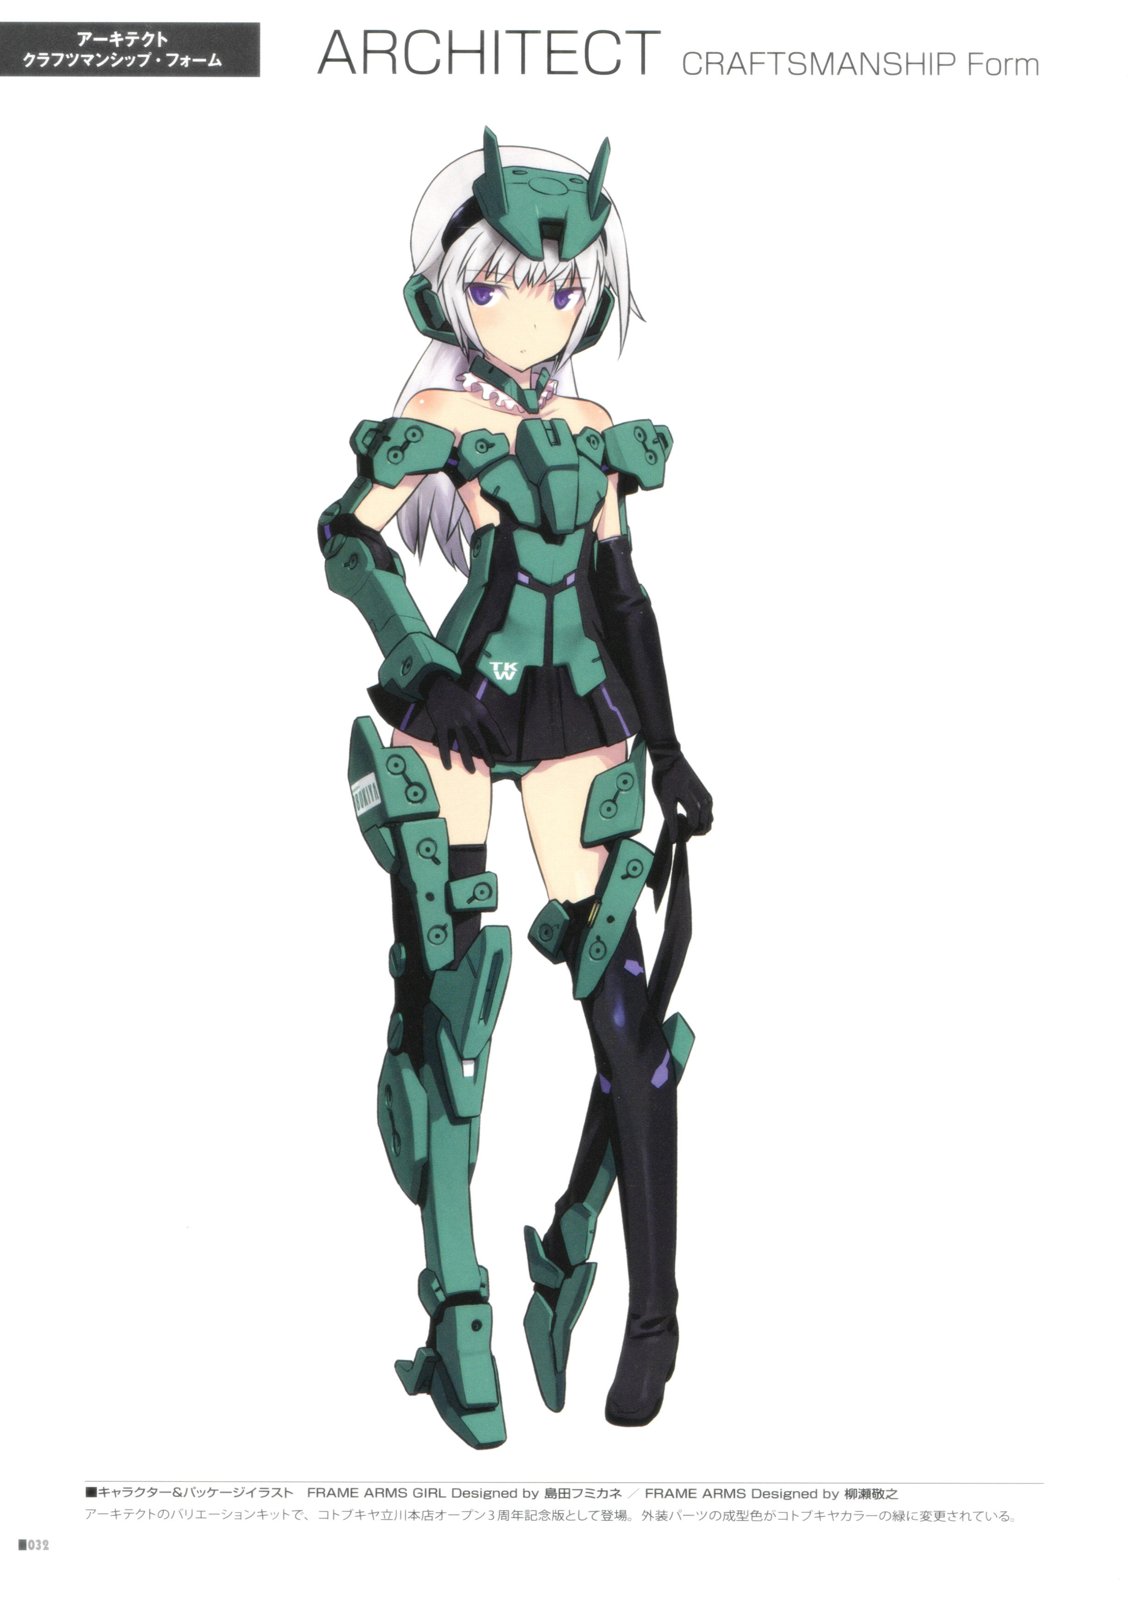 FRAME ARMS GIRL DESIGNERS NOTE - 全一卷(1/5) - 7